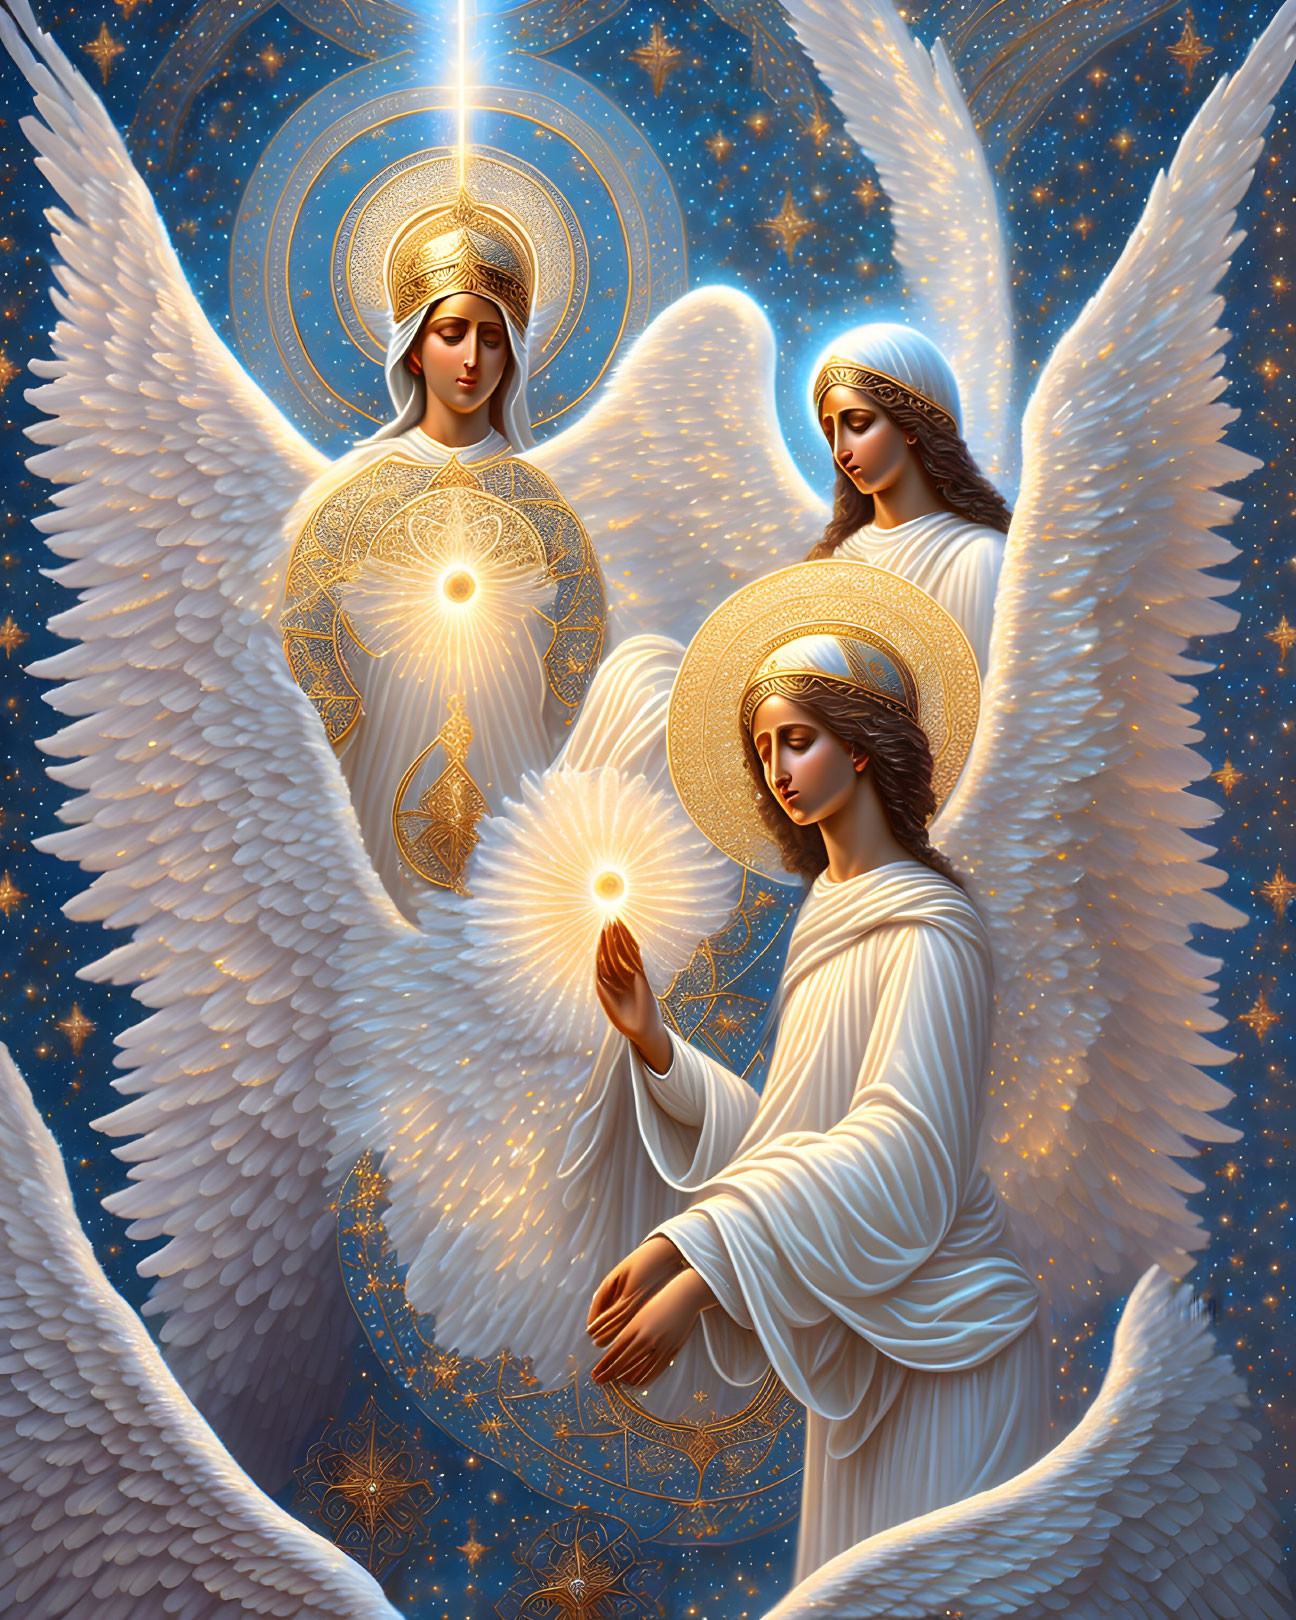 Three Angels with Golden Halos and White Wings in Celestial Setting